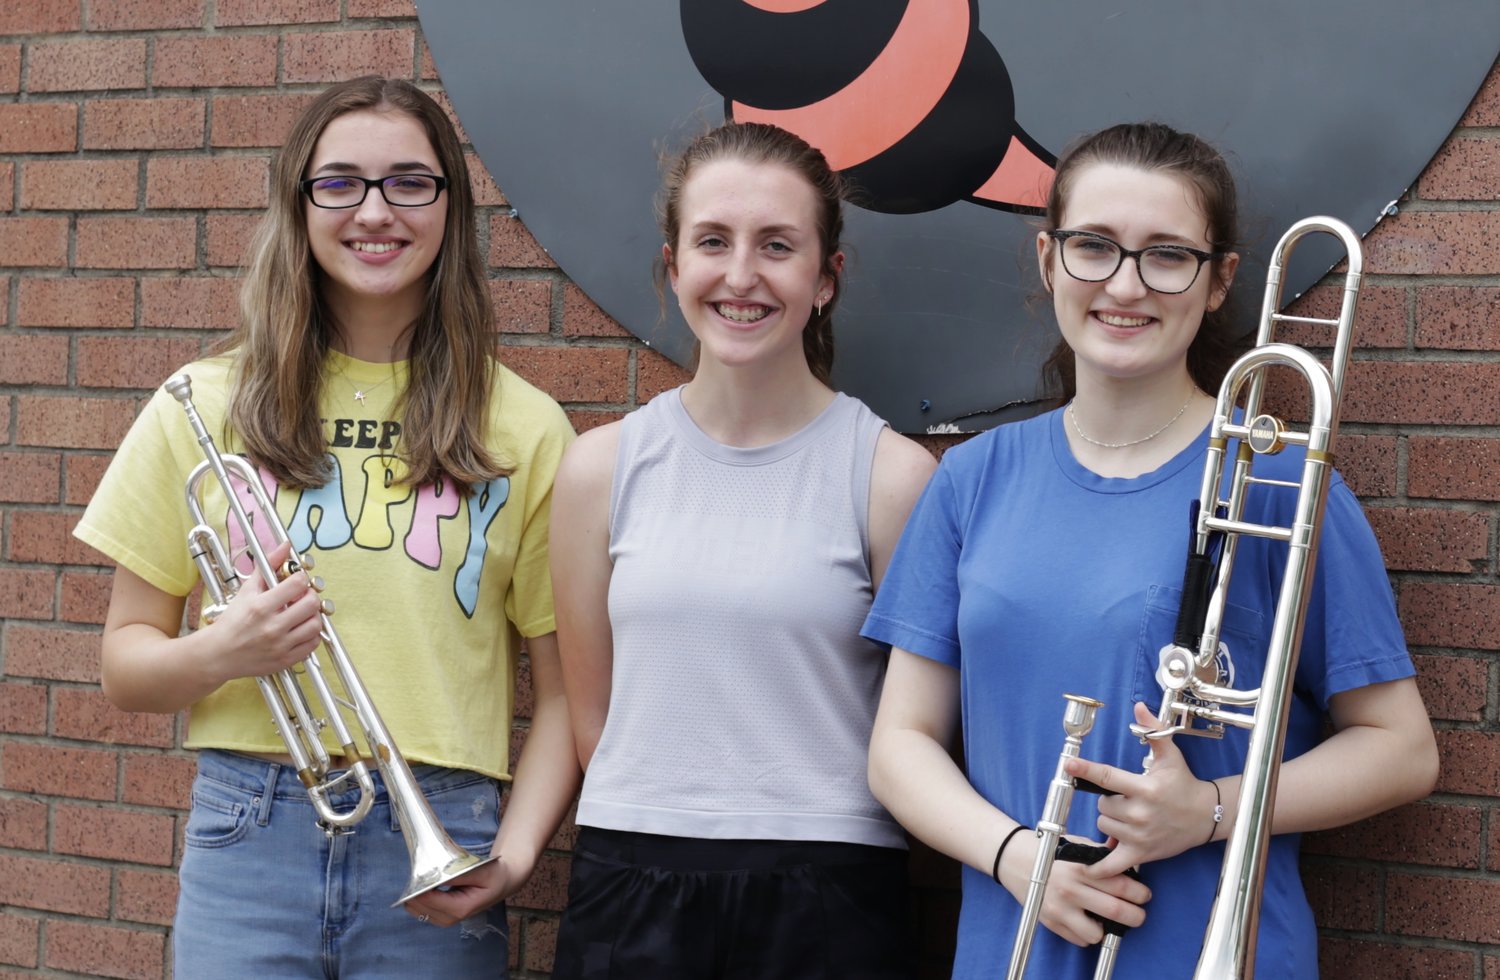 Taking a break from an early June music session were (from left) Brass Captain Ali Jordan, Drum Major Maddie Tucker and Brass Captain Gabby Wolf.